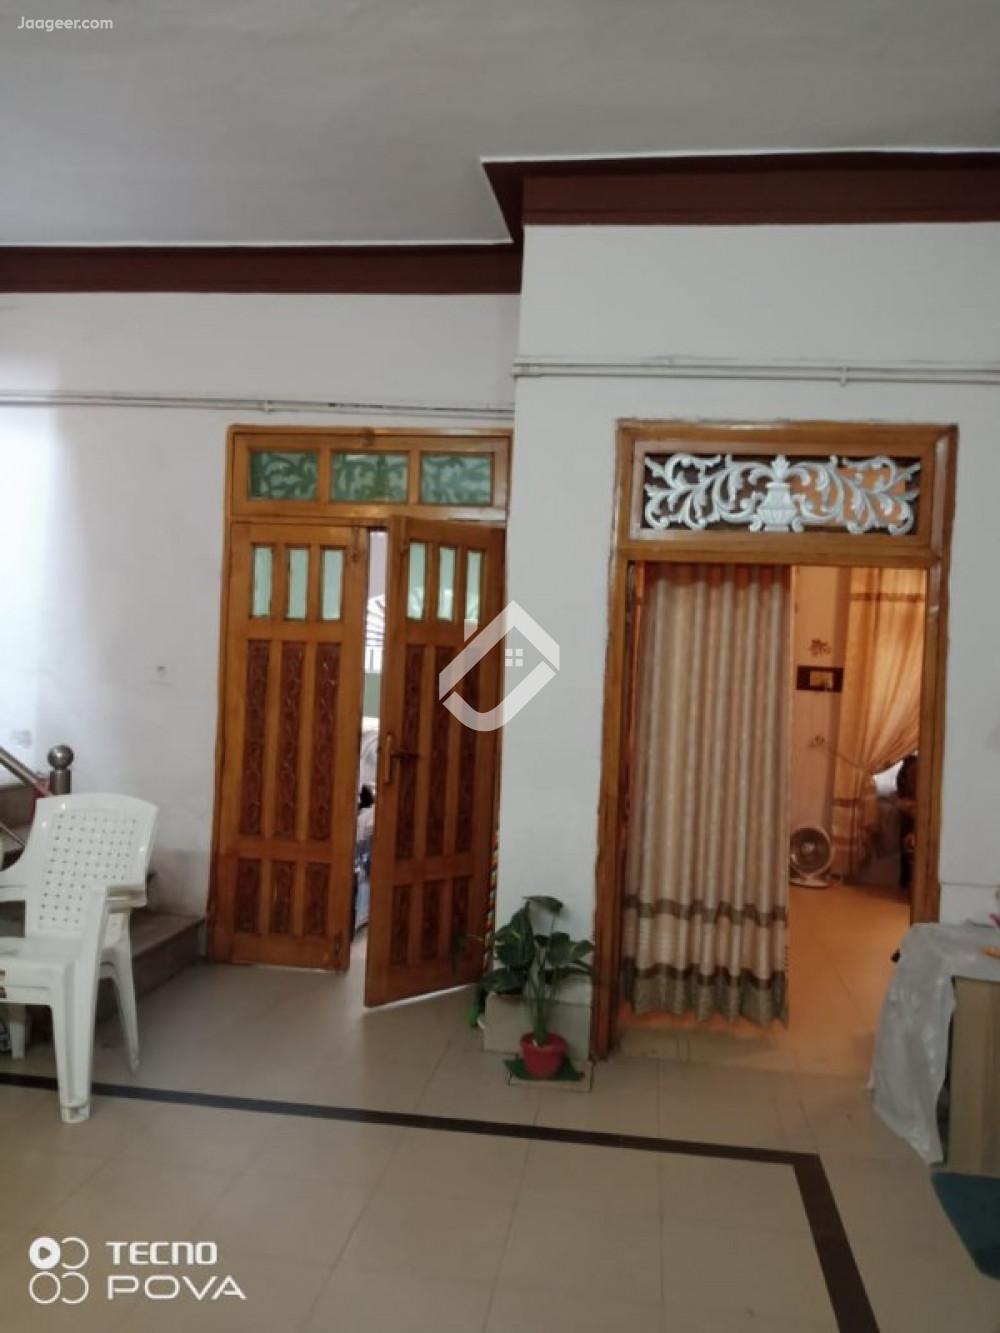 5 Marla Double Storey House For Sale In Block No. 15 in Block No. 15, Sargodha